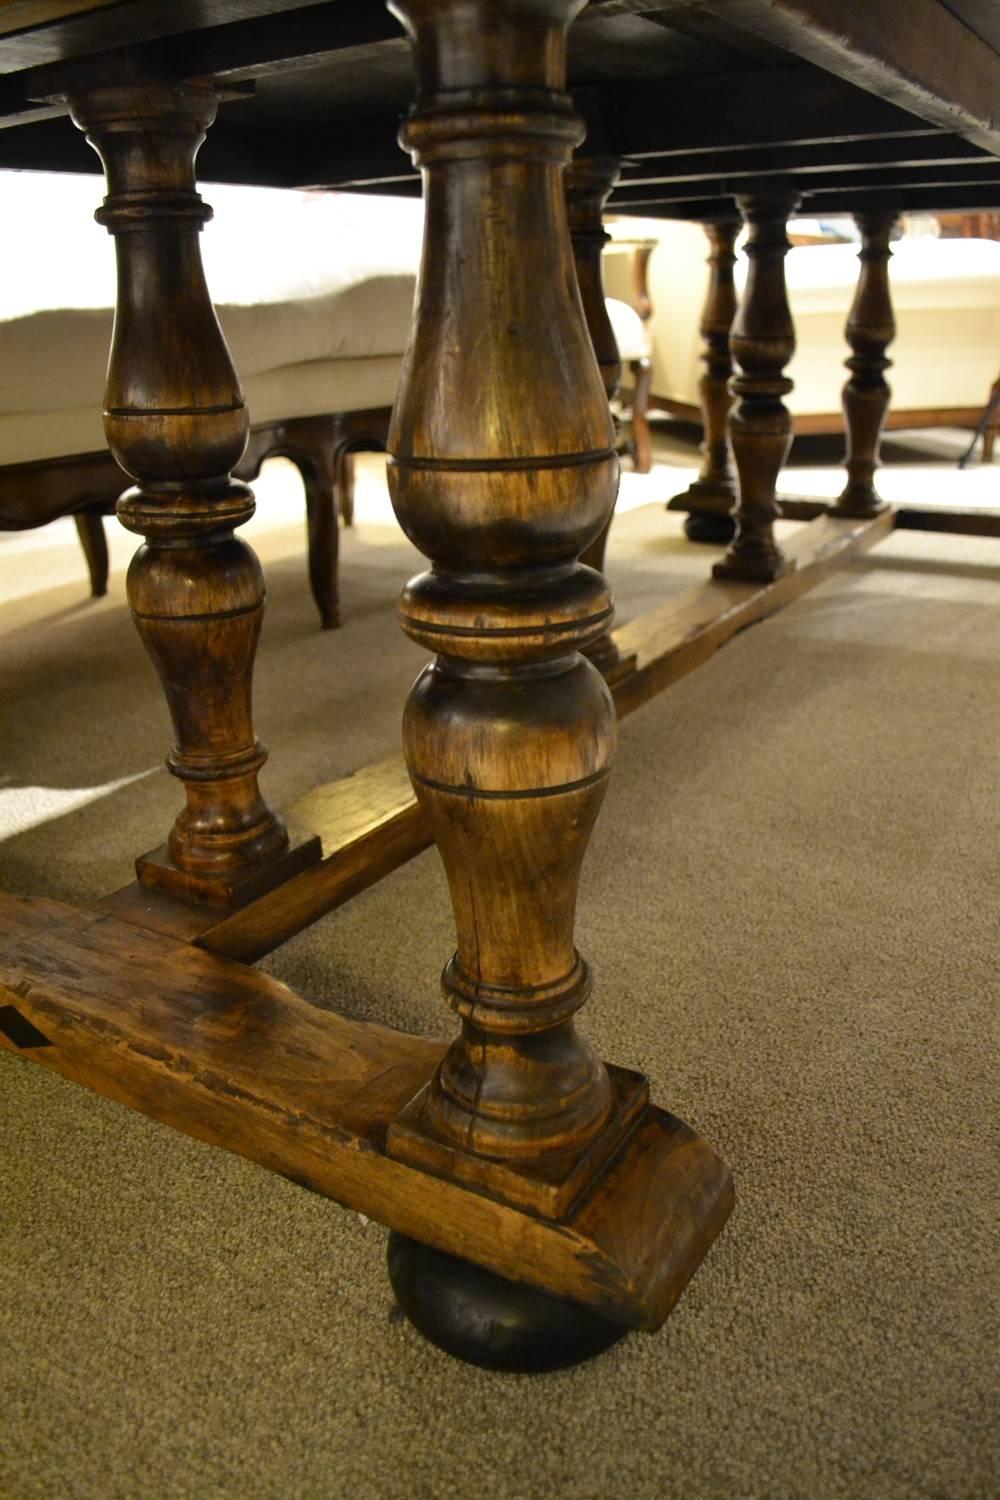 The Savoie table was inspired by a decorative antique piece, then designed to be even better than the original. It is in solid maple with a dressy turned base, a top inlay of solid ebony, maple, oak, and bubinga and diamond inserts of ebony. It has